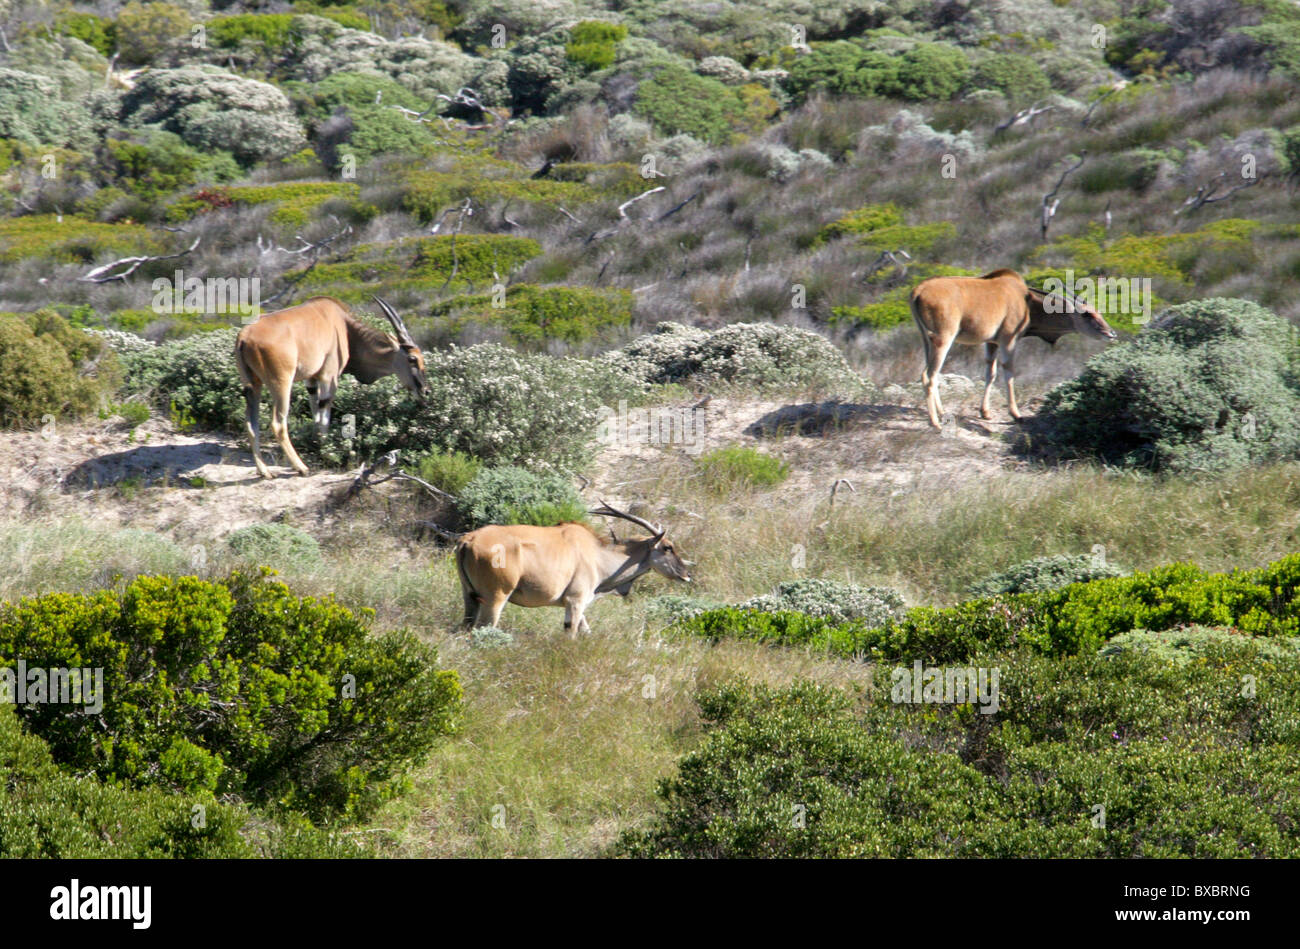 A Group of Three Common or Southern Eland, Taurotragus oryx, at Cape Point, Cape Peninsular, South Africa. Stock Photo